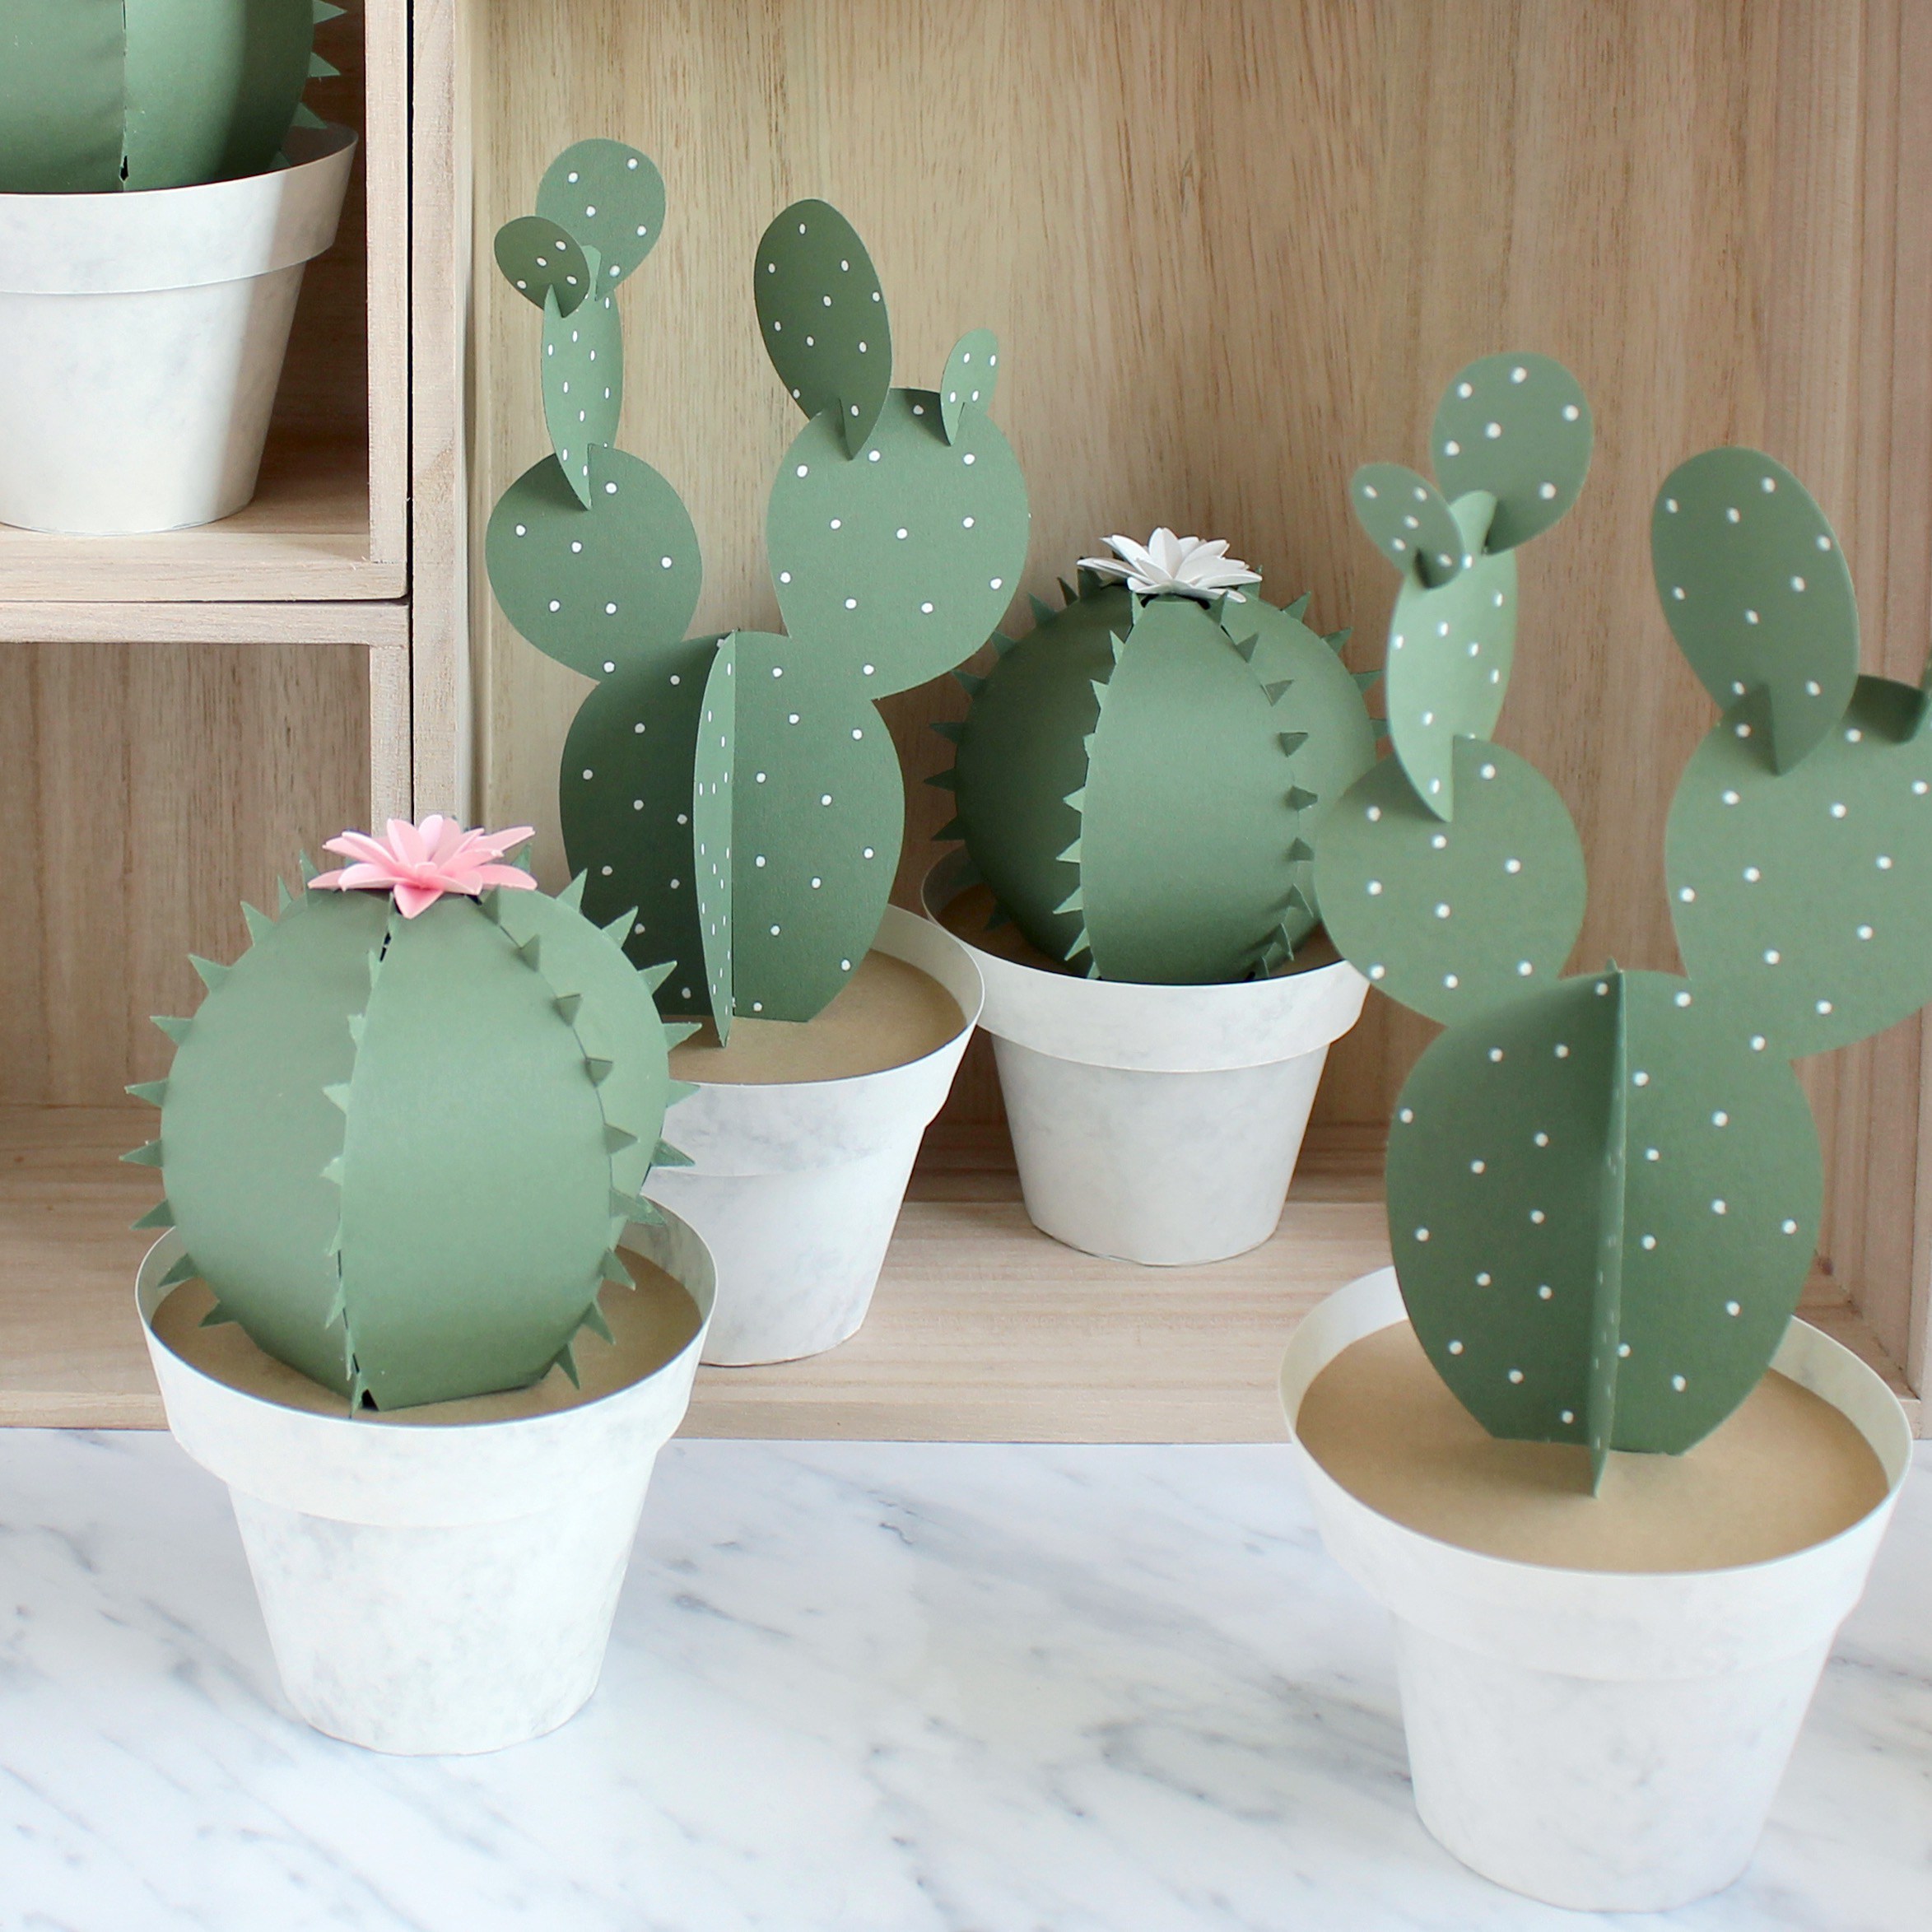 DIY Paper Cactus Is Cheap Decor That Looks Surprisingly Awesome - Page .